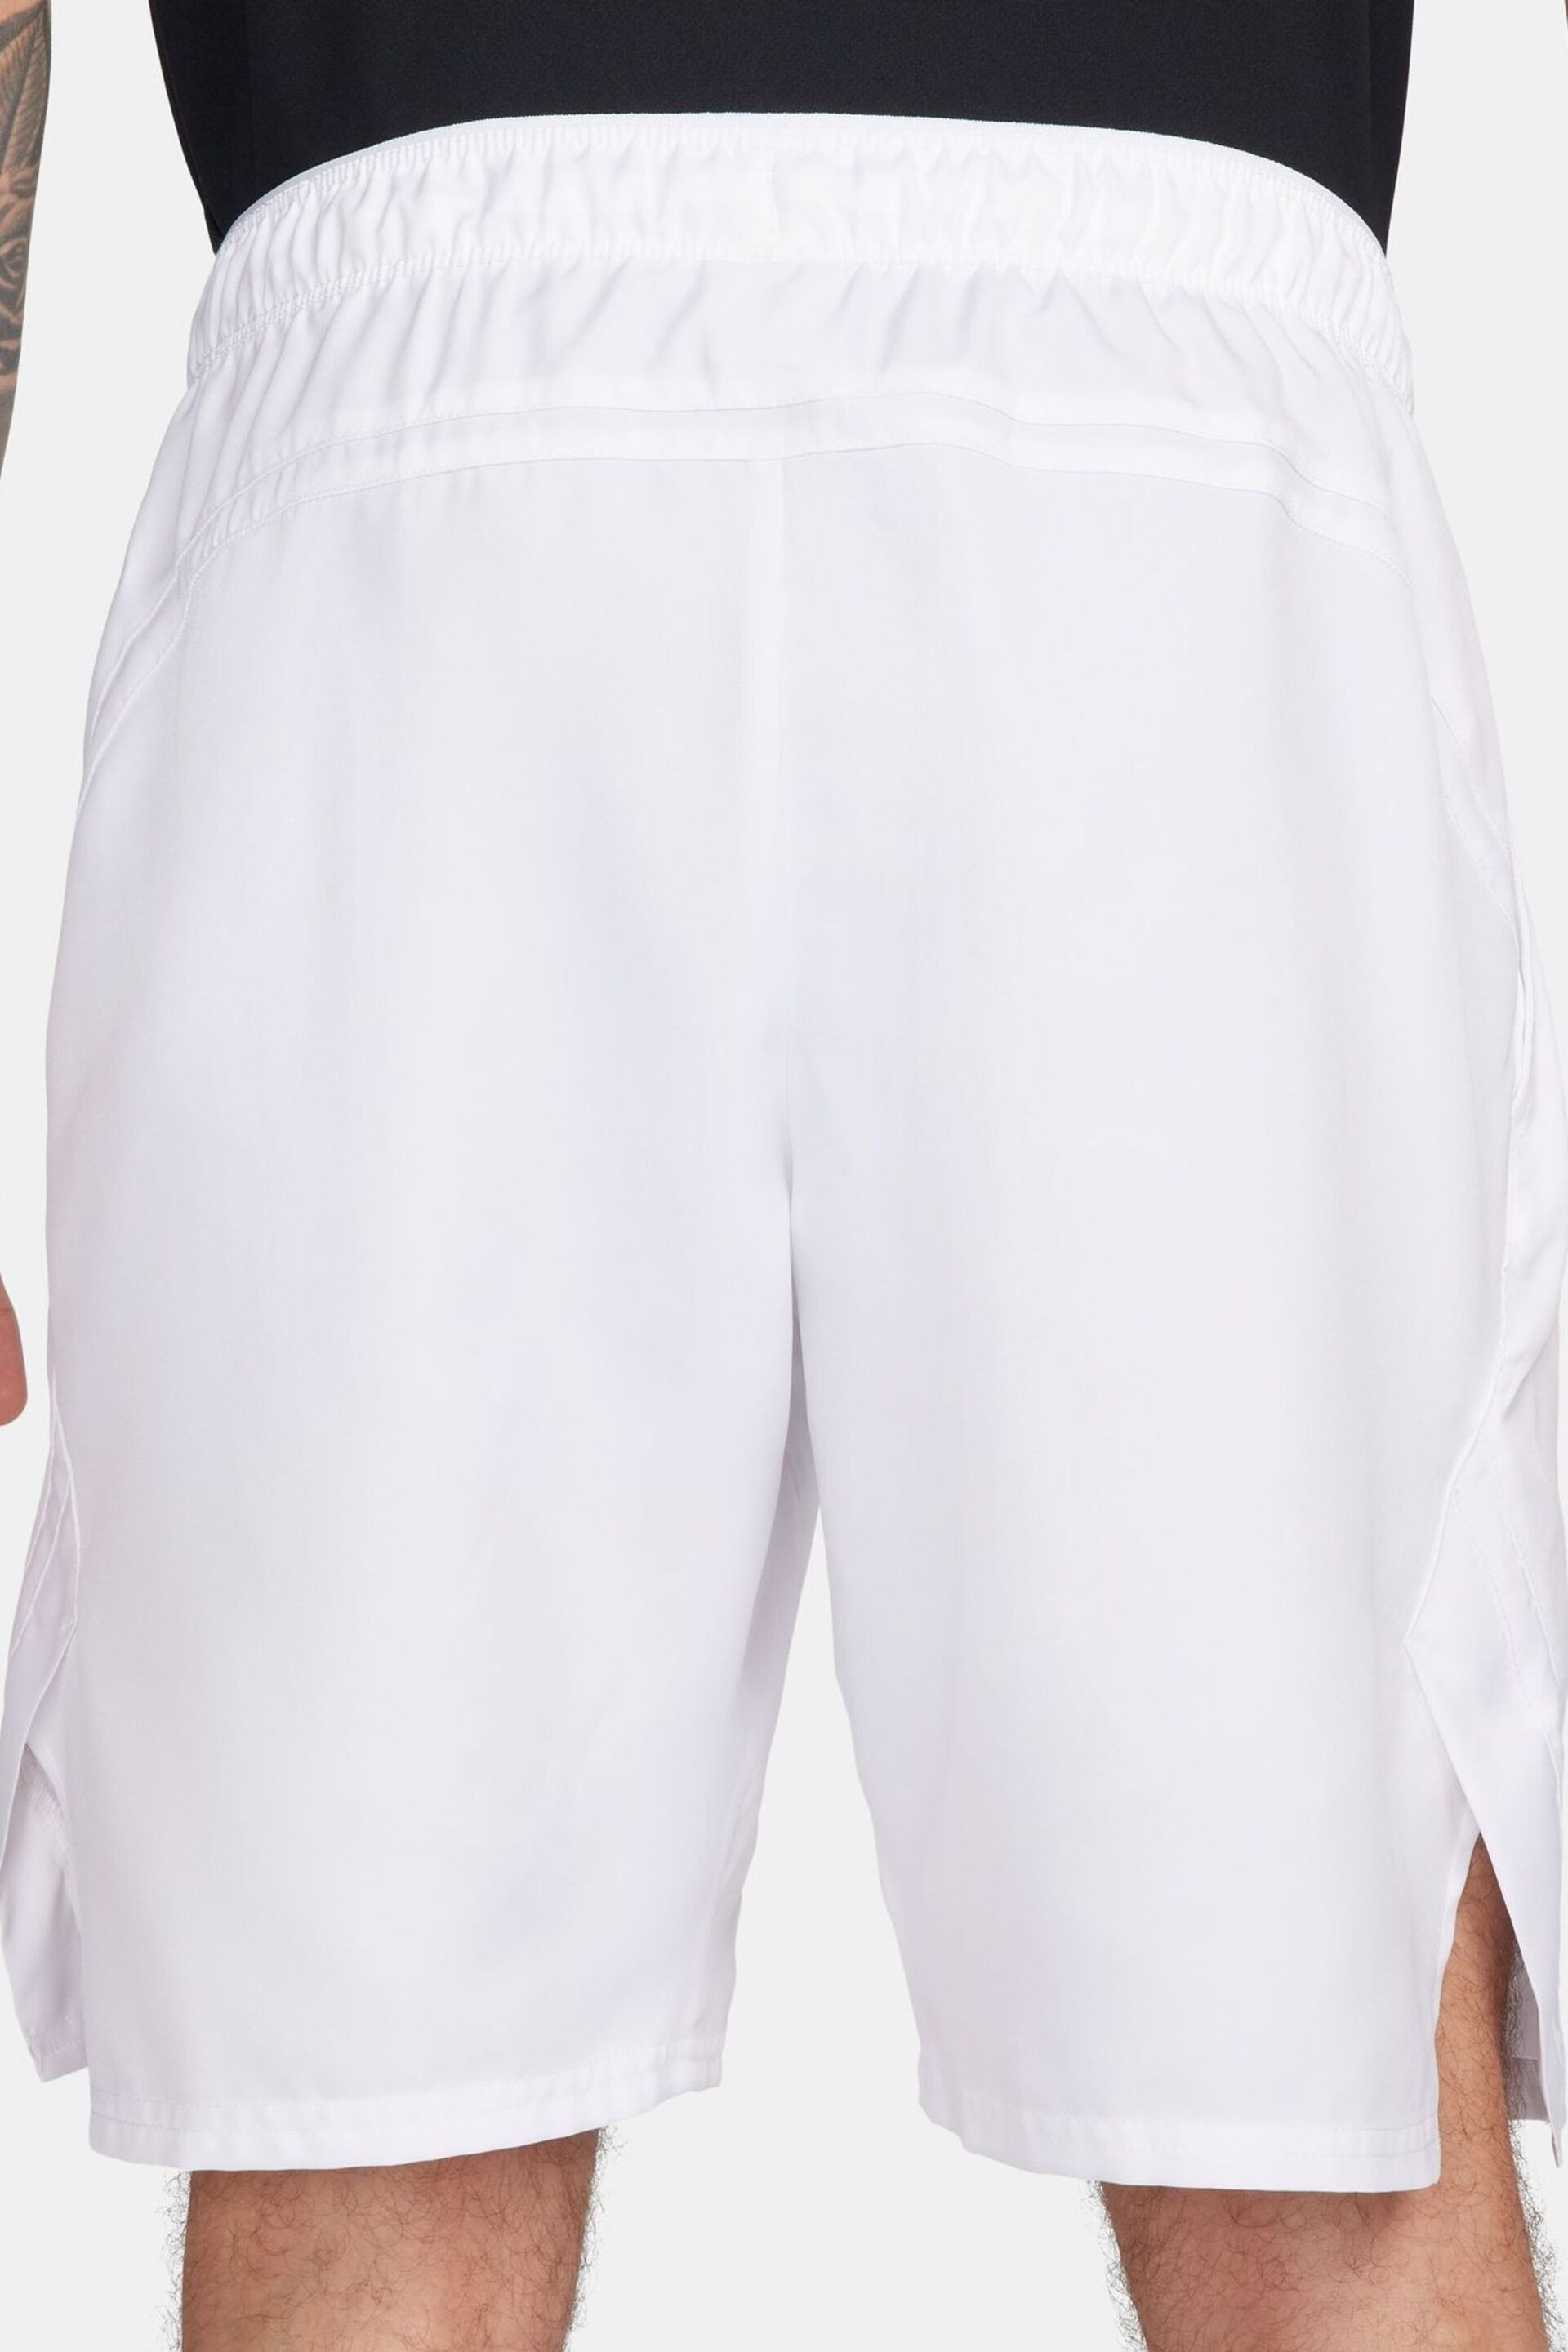 Nike White 9 Inch Court Victory Dri-FIT 9 inch Tennis Shorts - Image 2 of 6